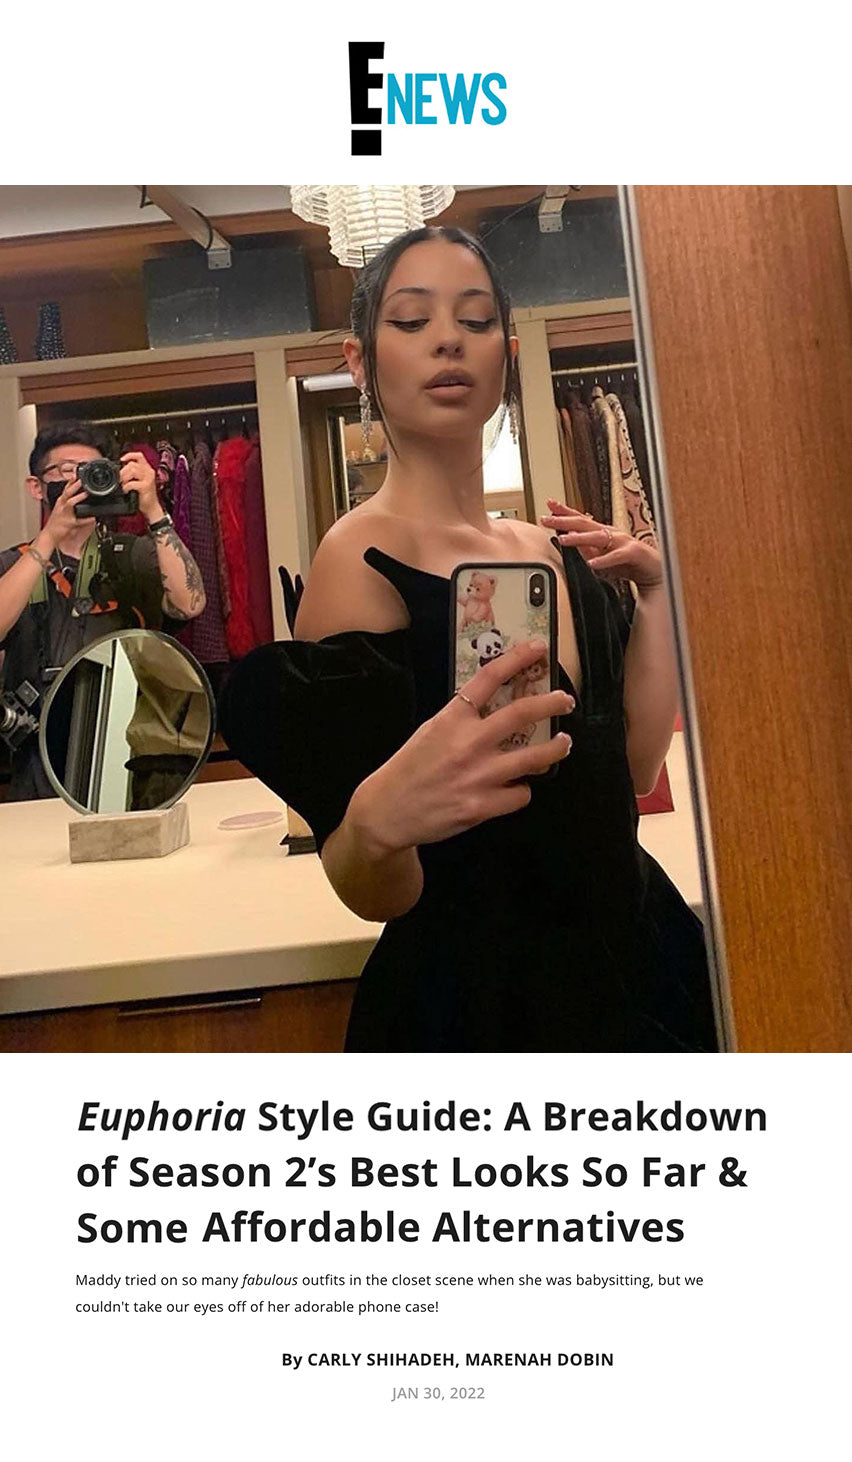 Euphoria Style Guide: A Breakdown of Season 2’s Best Looks So Far & Some Affordable Alternatives